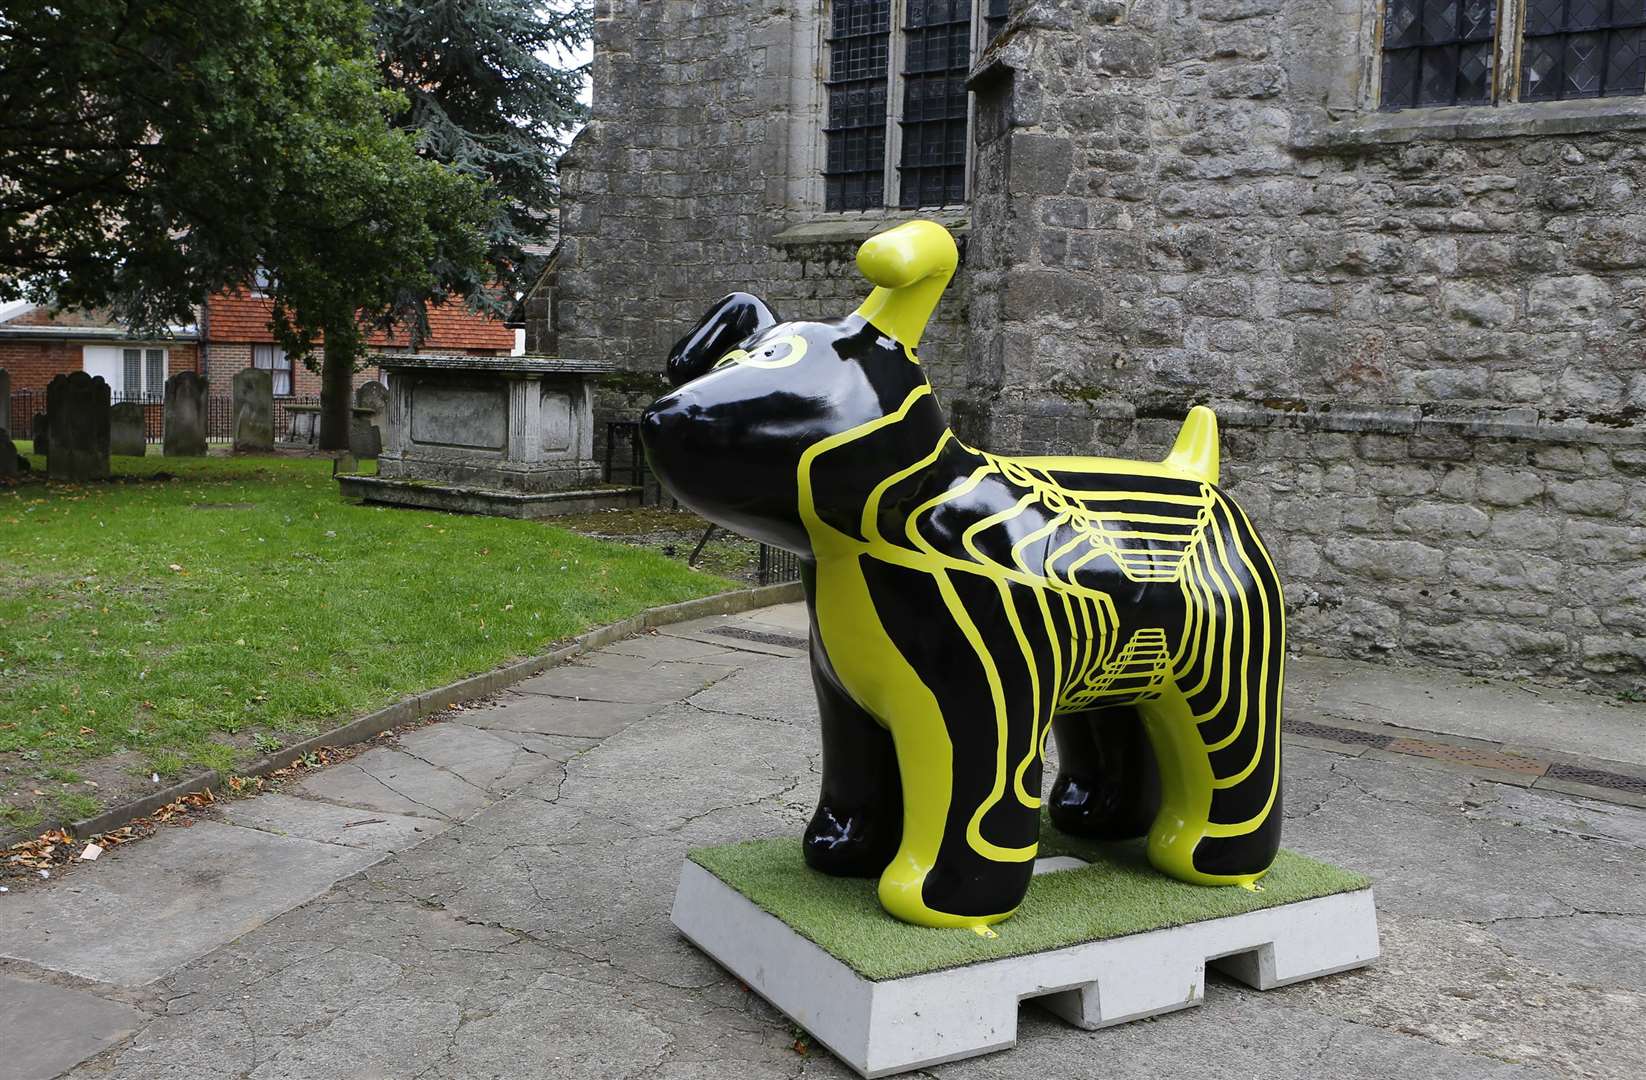 The Infinity Dog, by Jessica Holly Goddard, was removed from the church two weeks ago